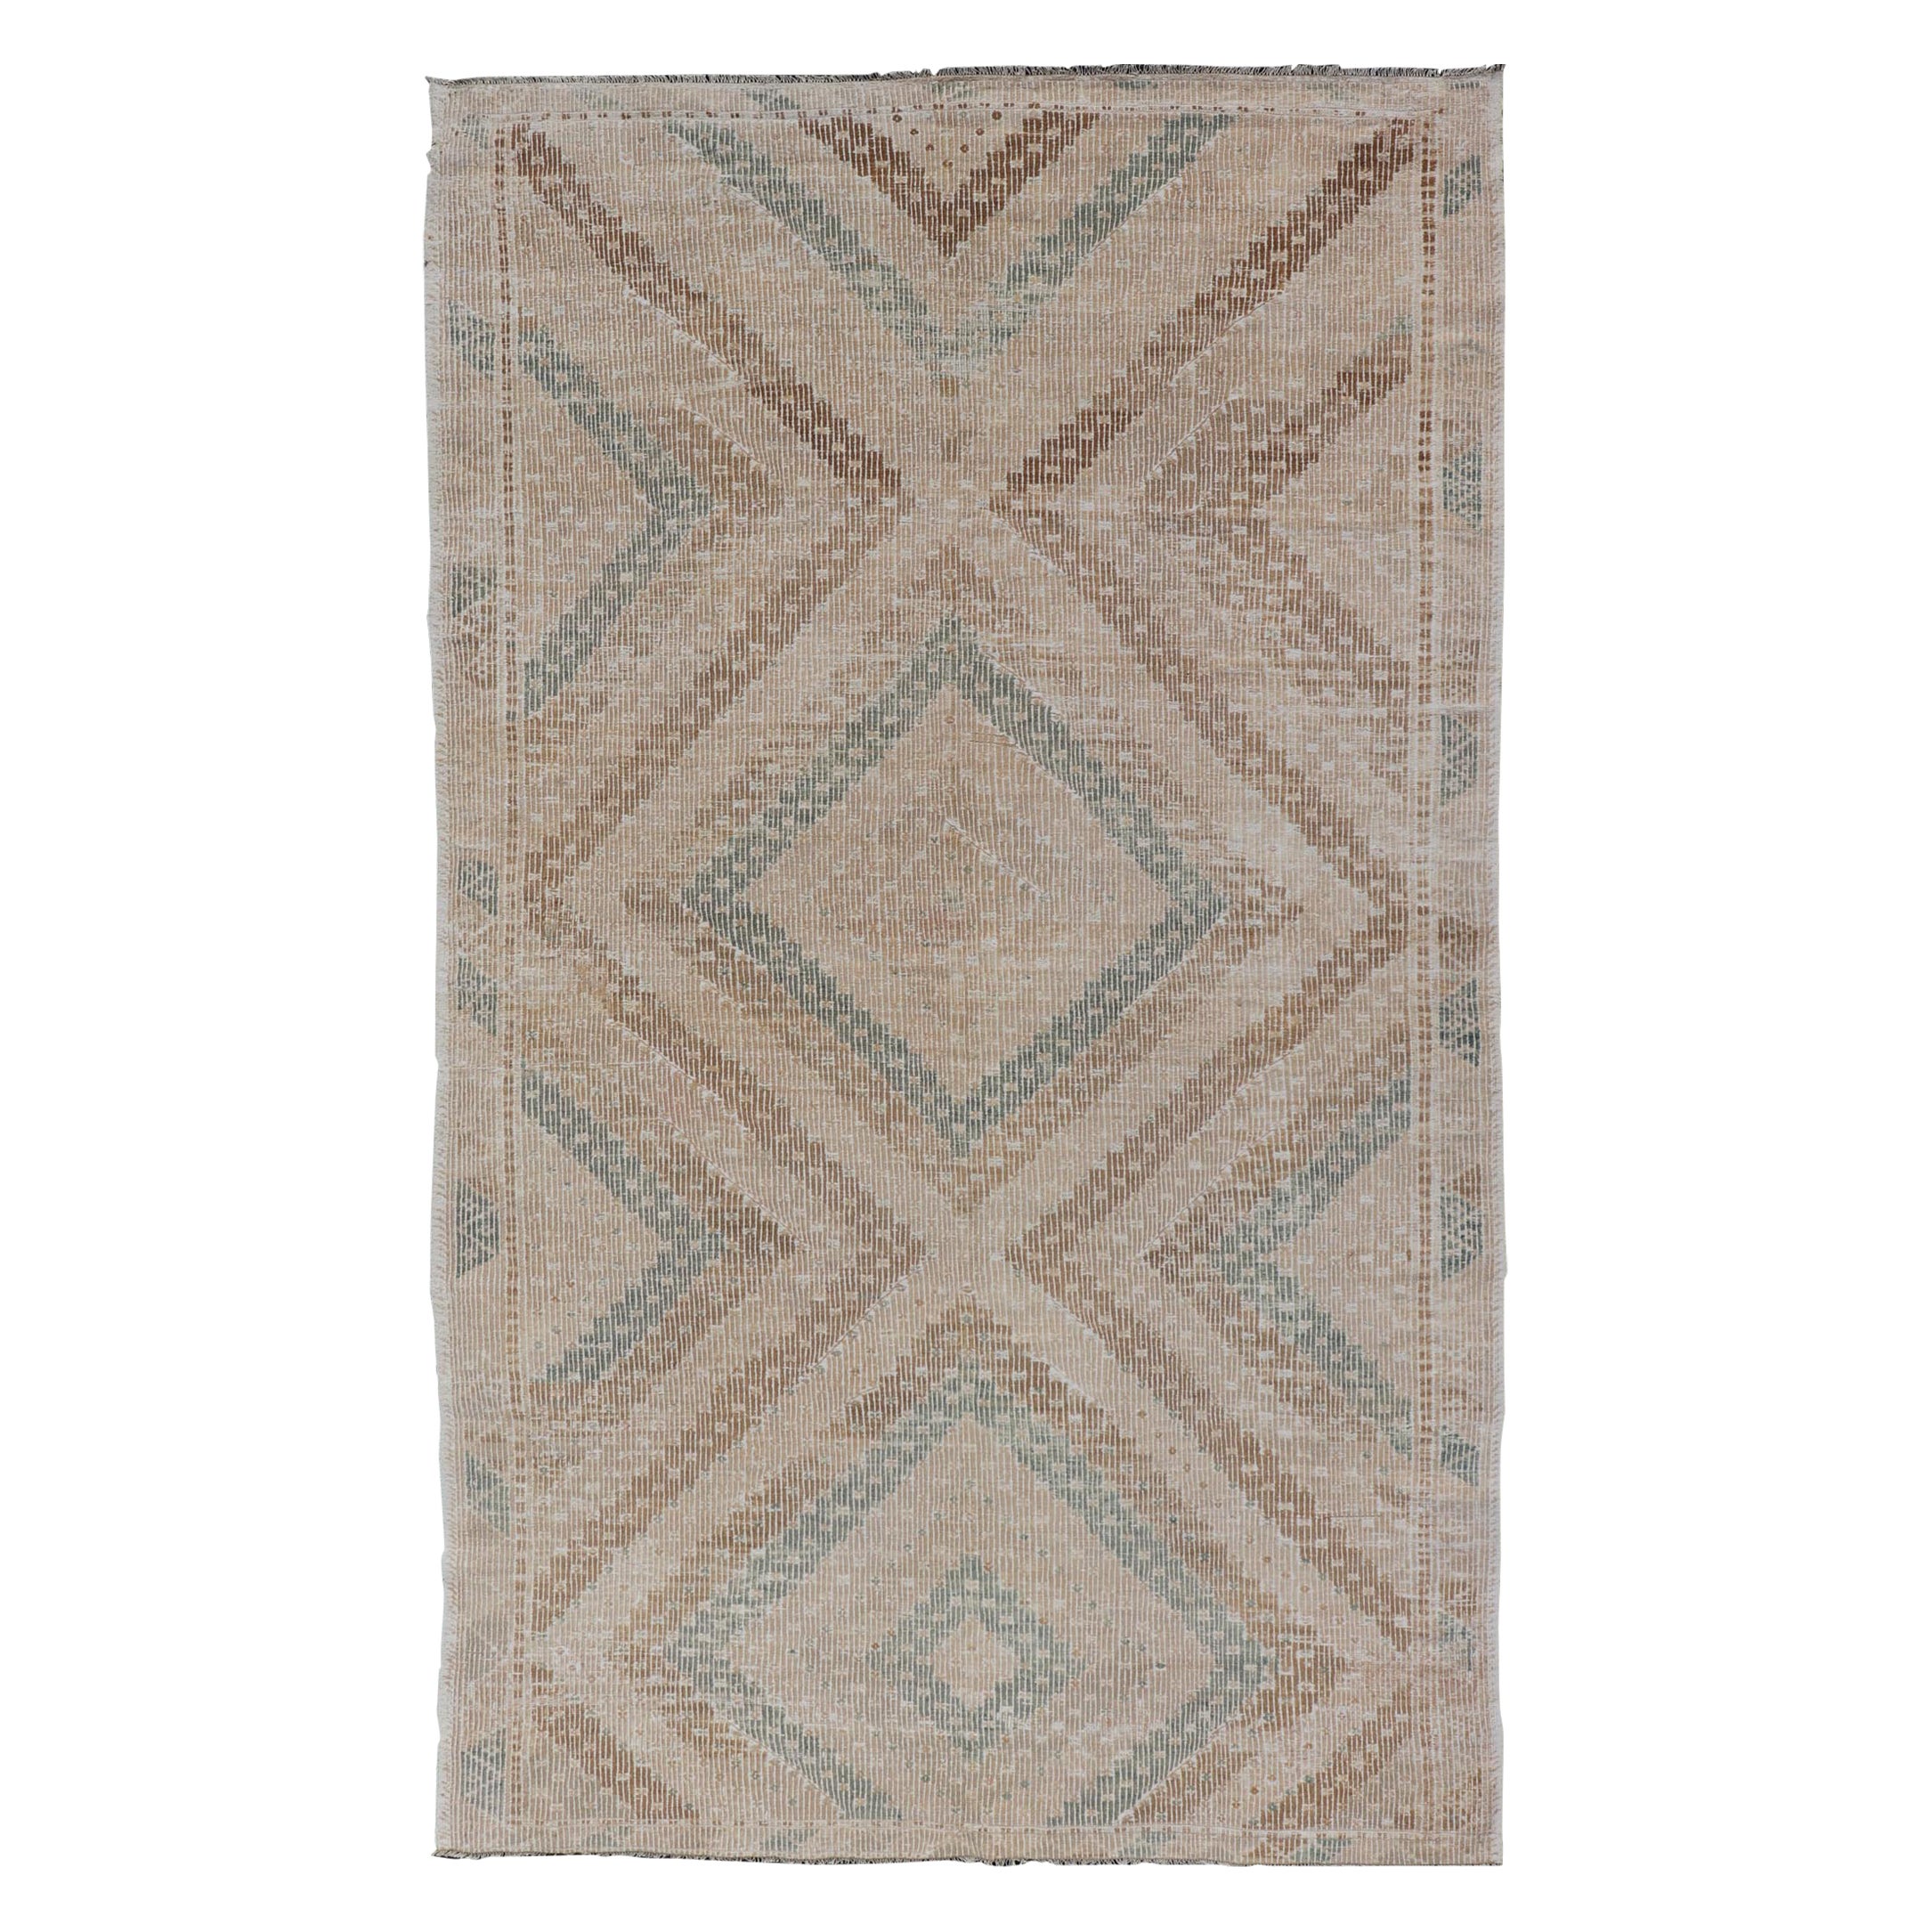 Vintage Hand-Woven Turkish Gallery Kilim Rug in Wool with Diamond Design